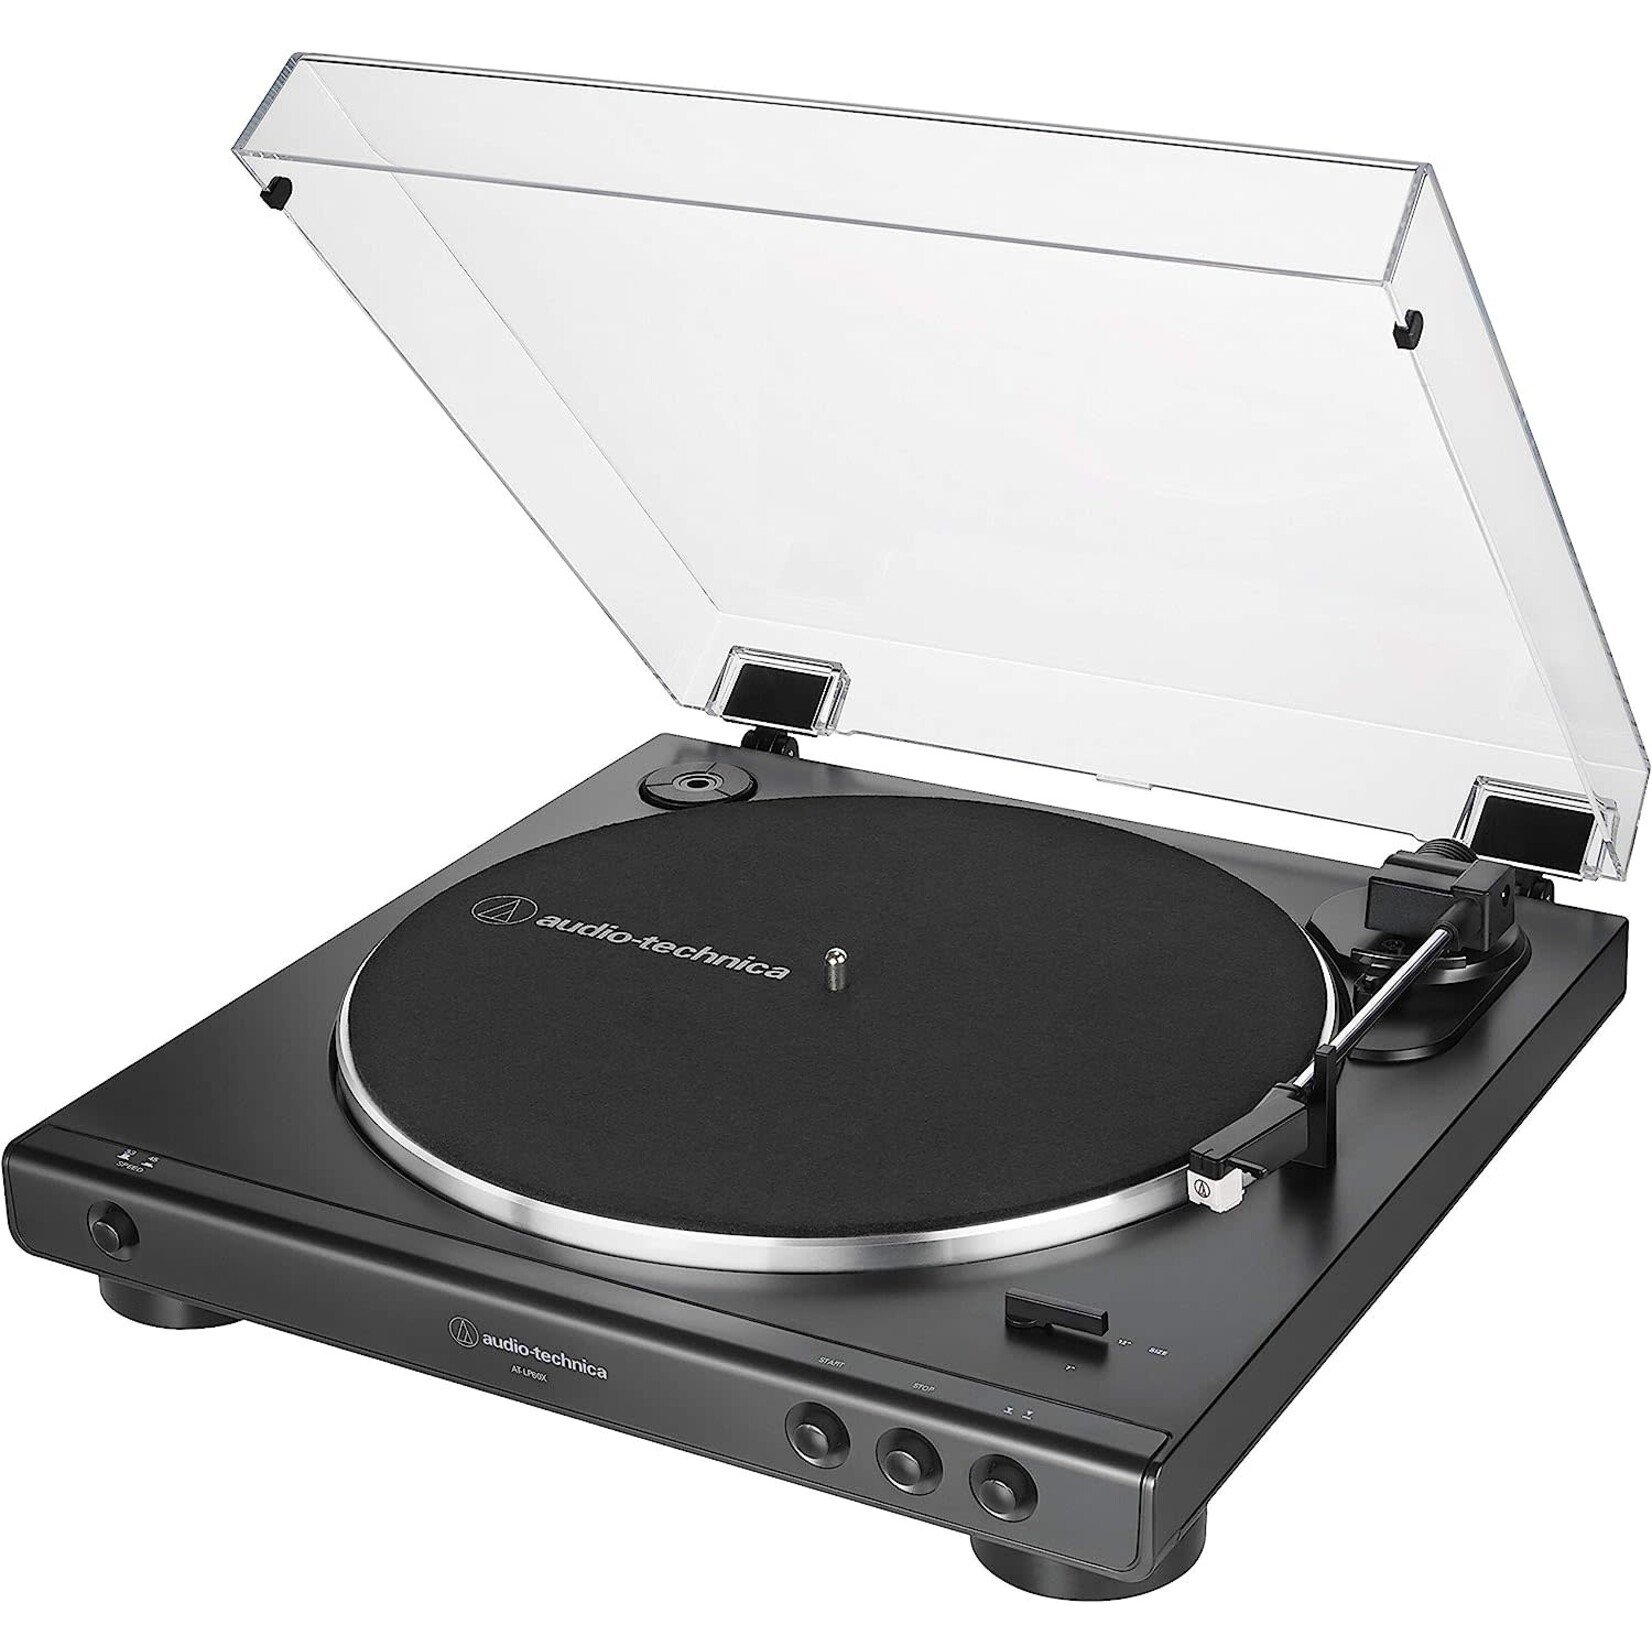 Fully Automatic Belt-Drive Turntable - Black